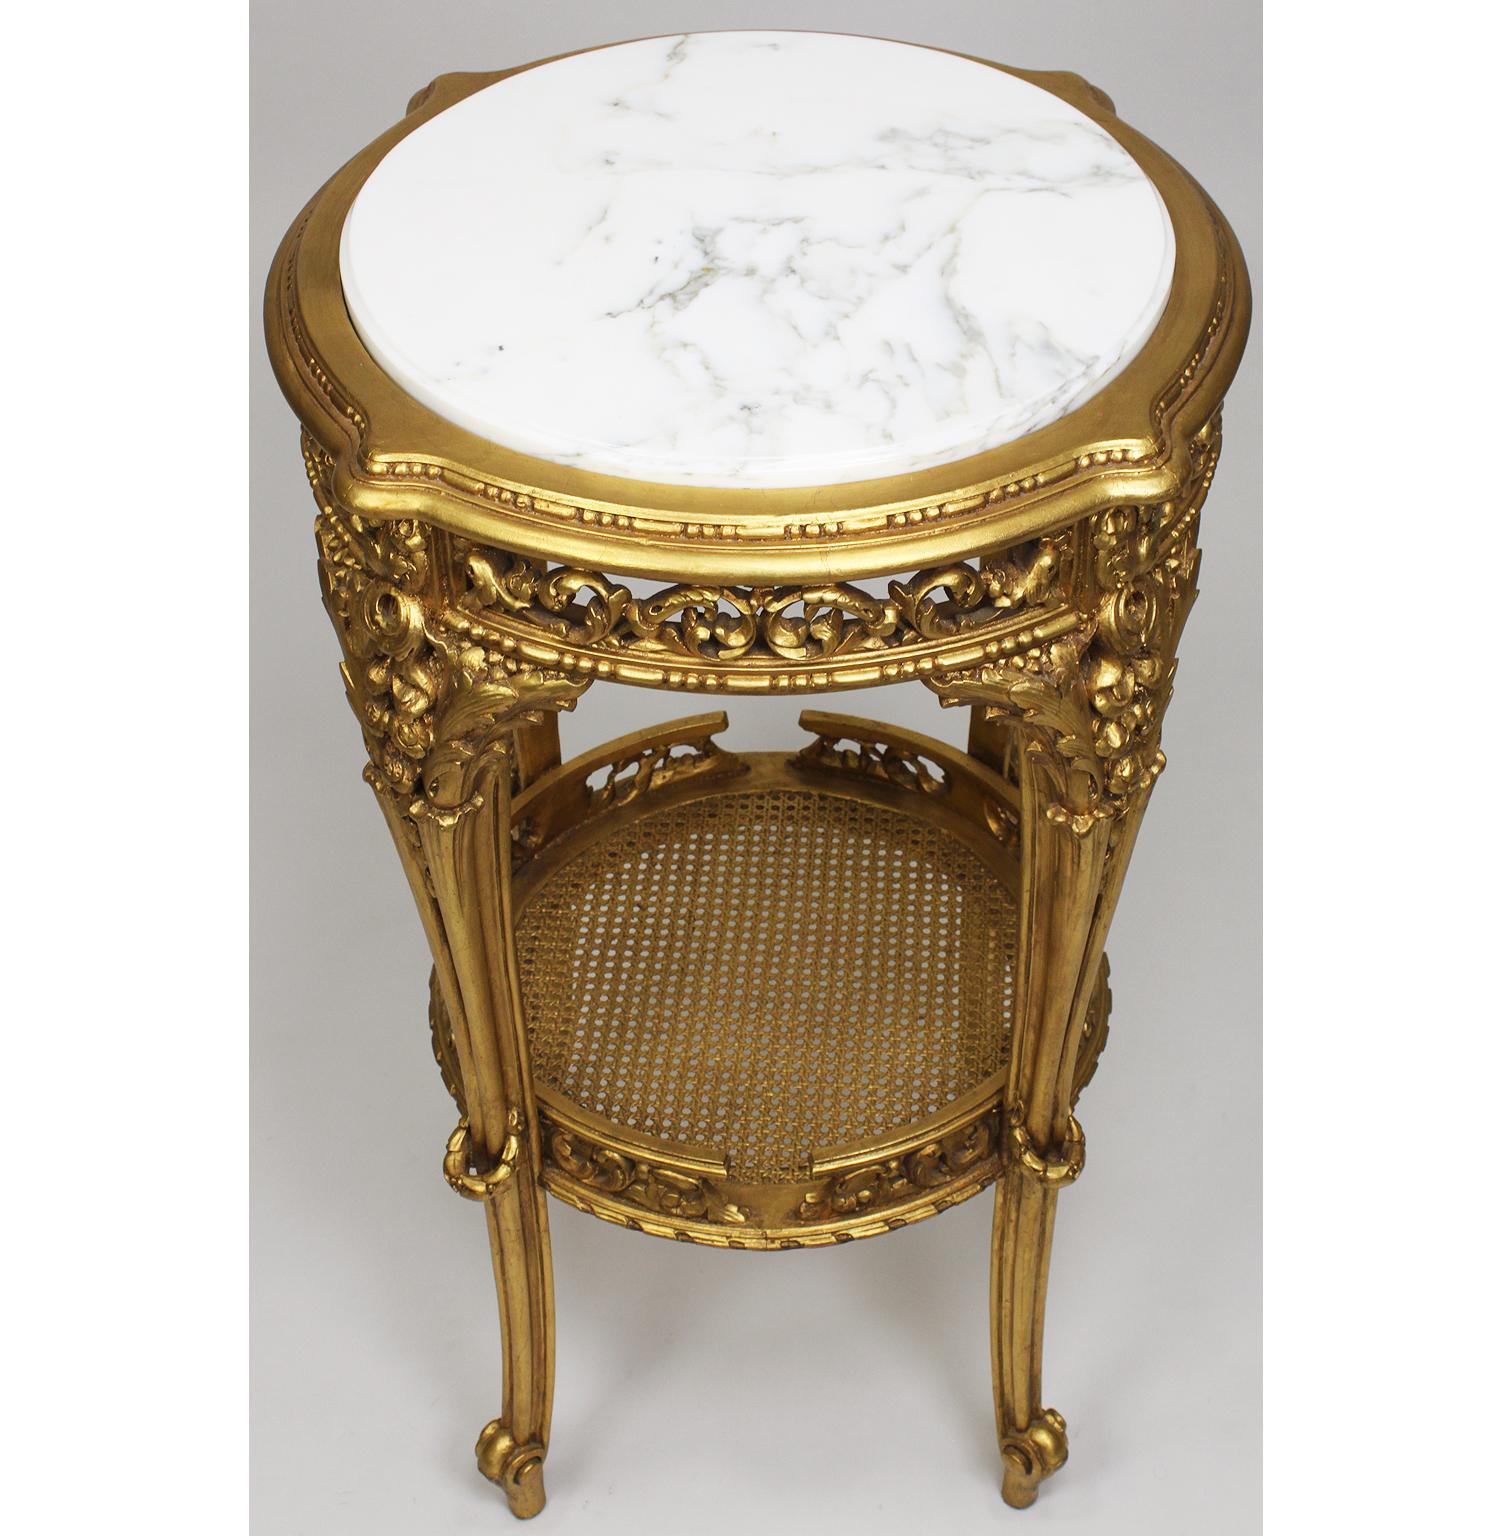 A French Louis XV Style 'Belle Époque' giltwood carved Guéridon side table with marble top. The circular giltwood carved apron with an floral acanthus and bouquets, raised on four cabriolet carved legs conjoined with gilded cane shelf with a carved